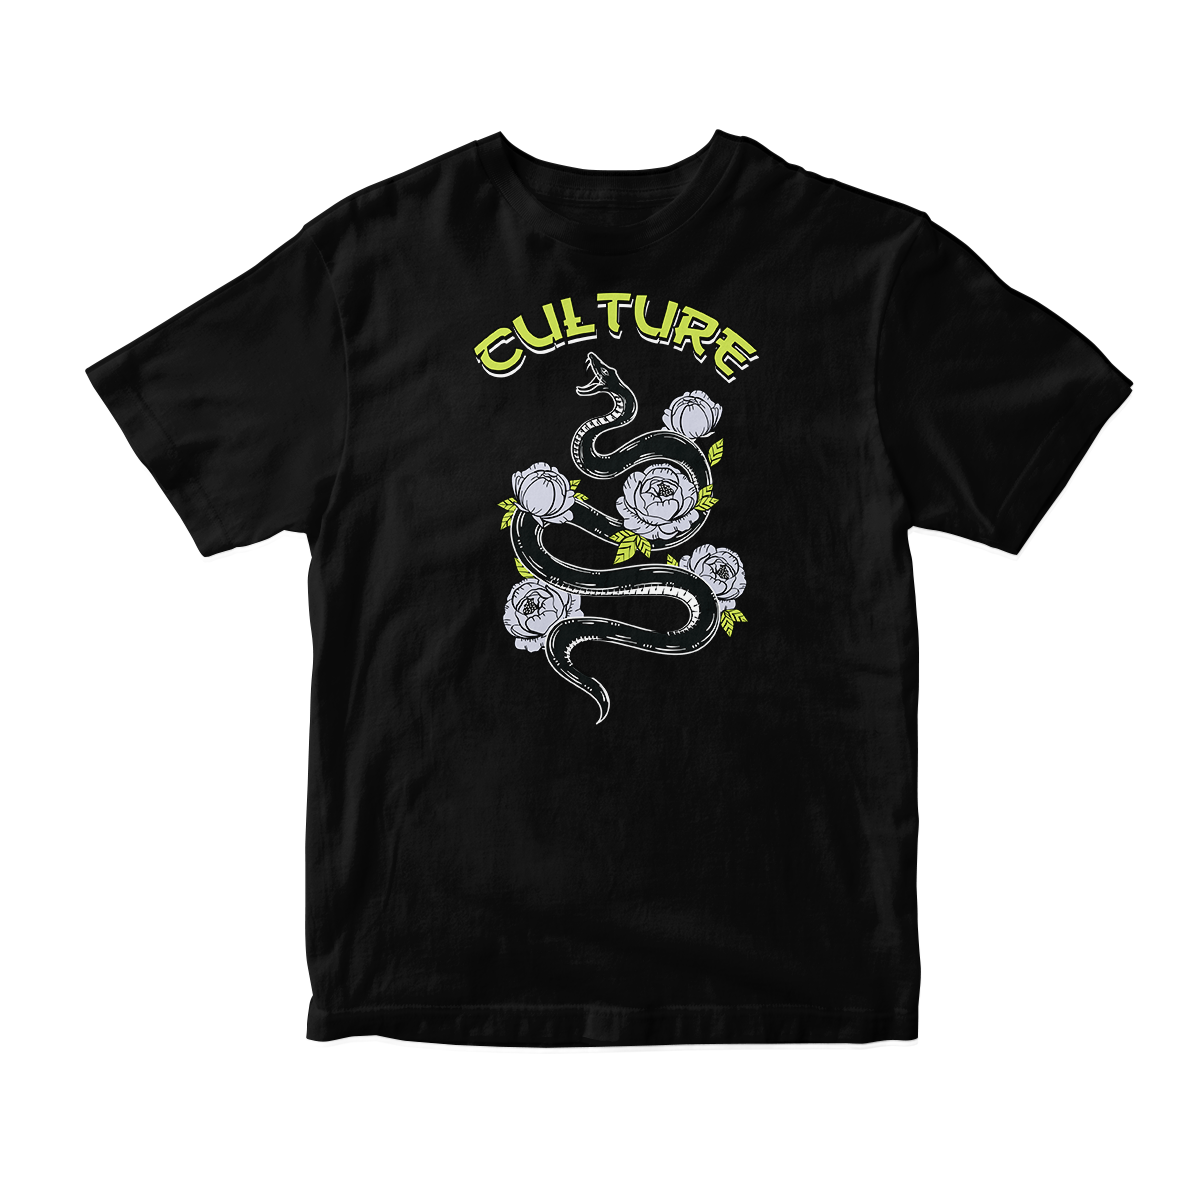 'Culture Snake' in Neon 4 CW Short Sleeve Tee